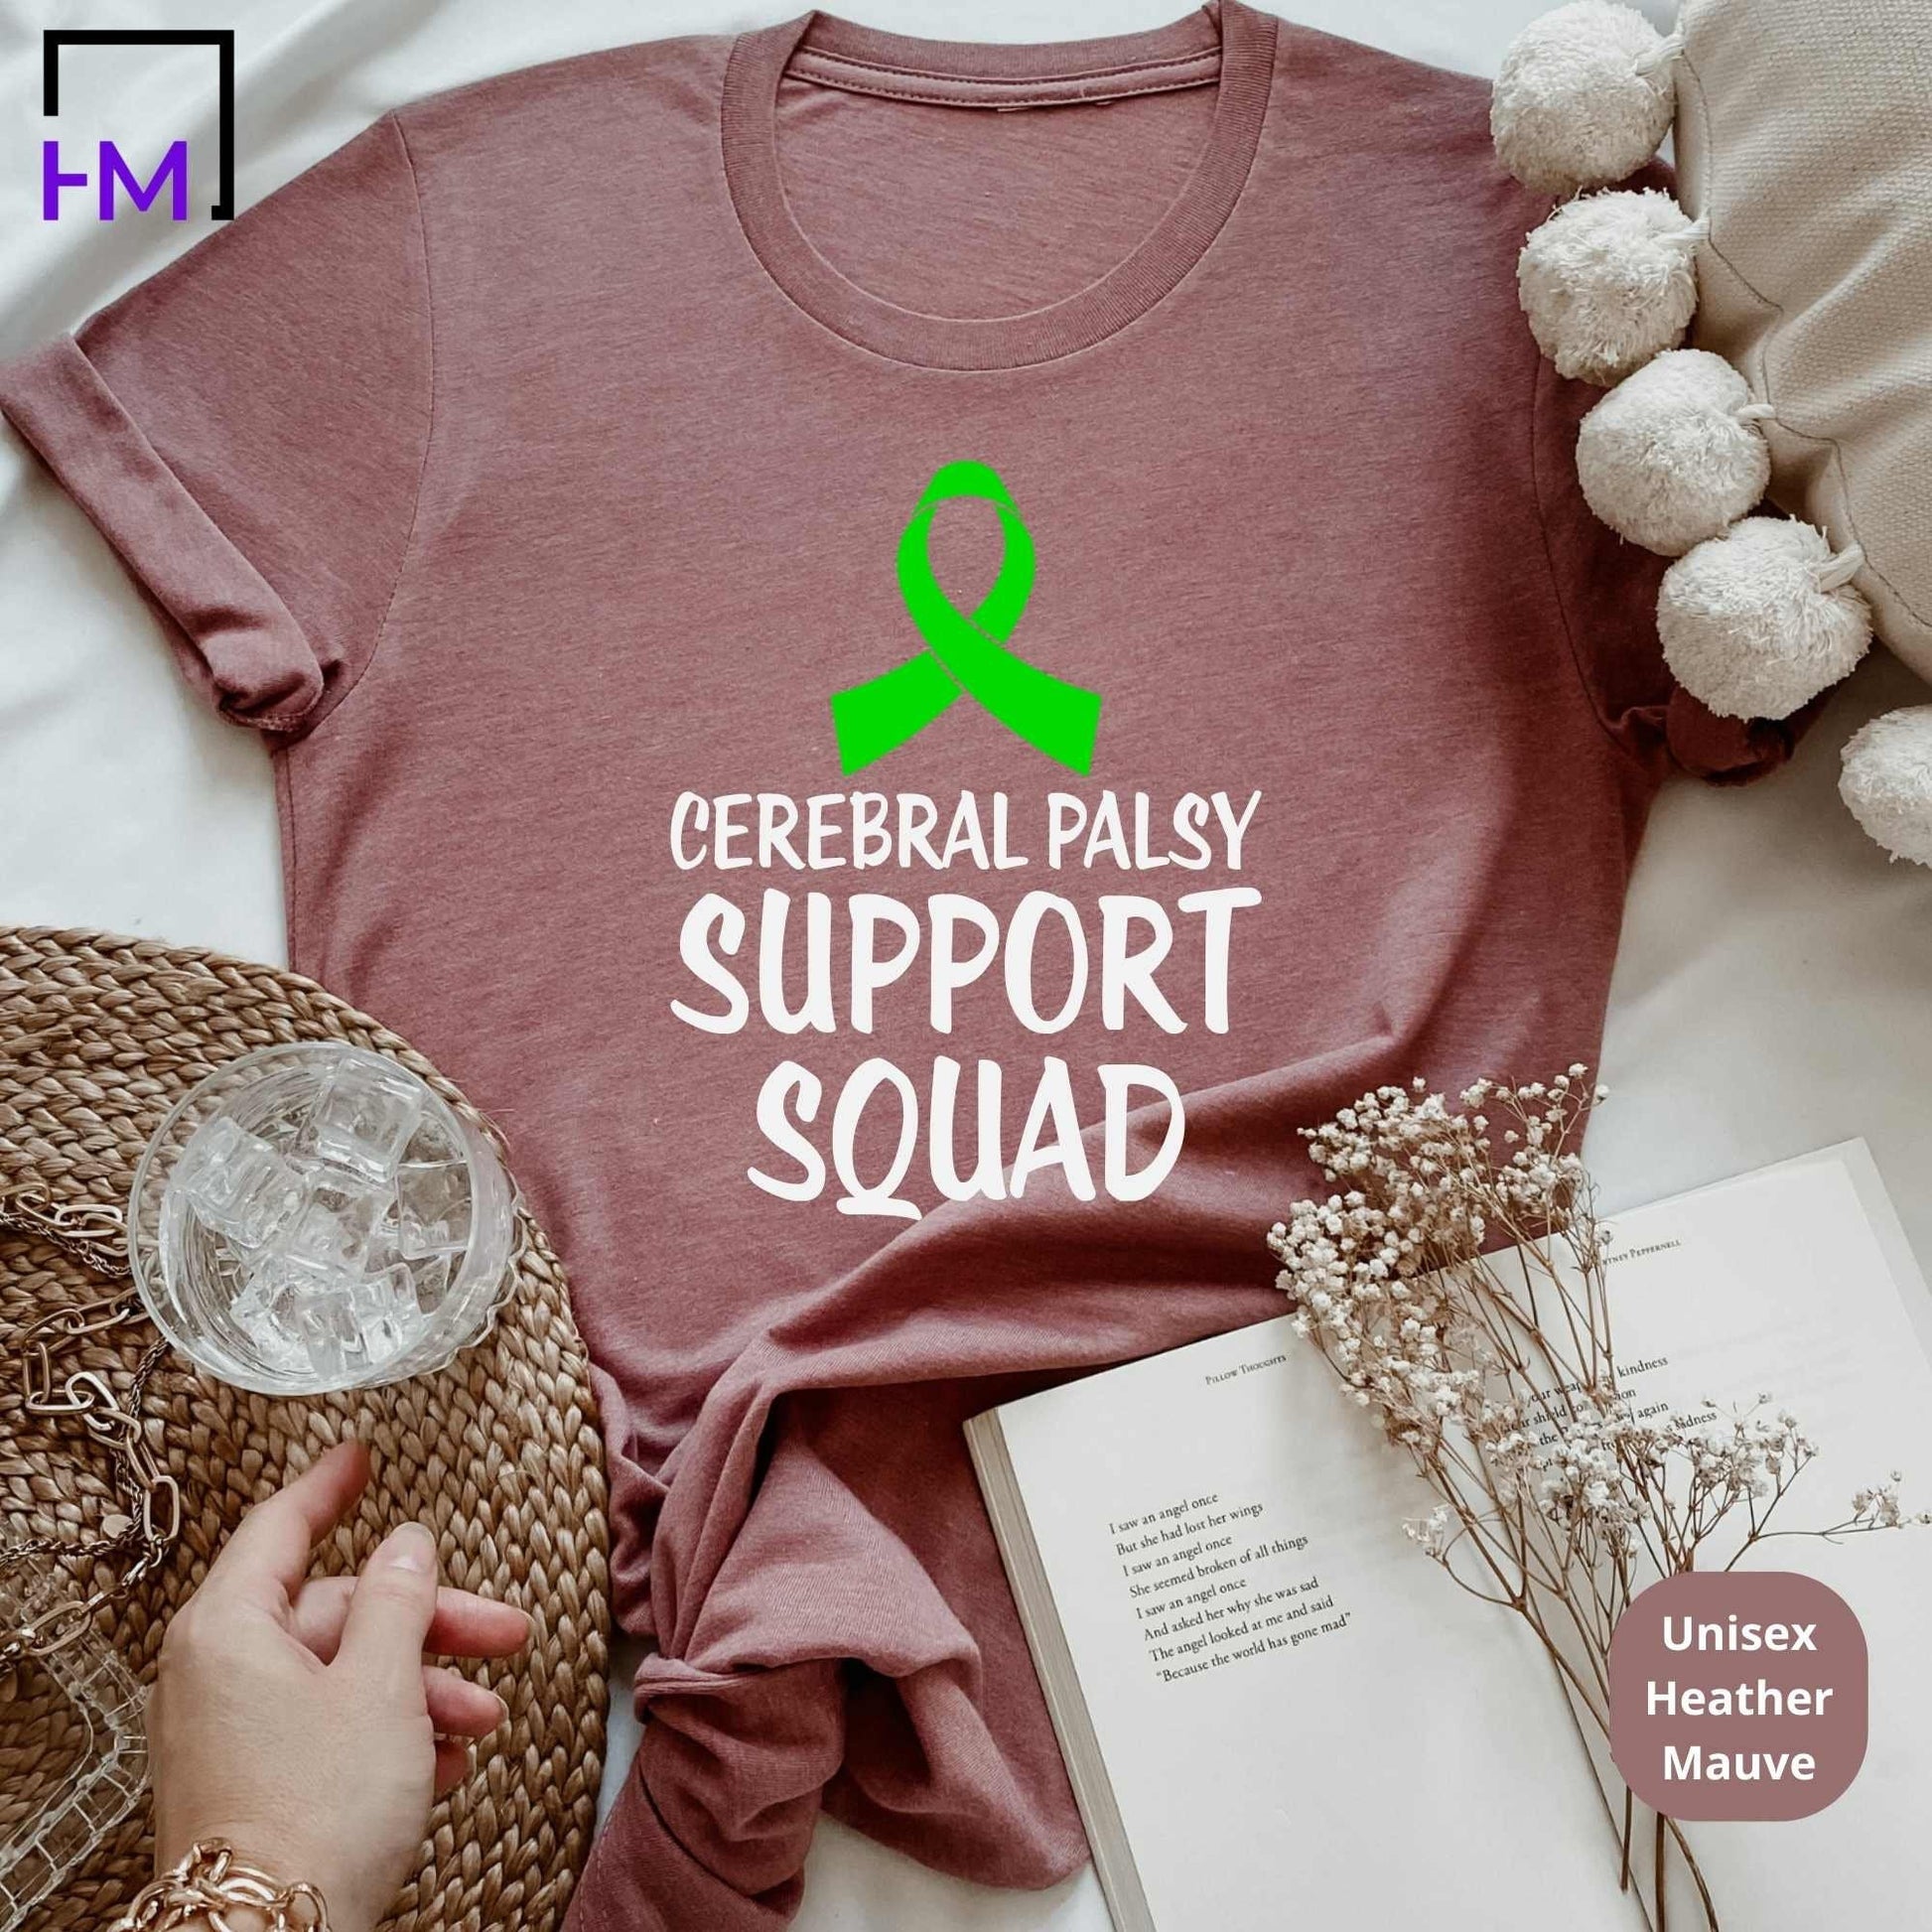 Cerebral Palsy Support Squad Shirt, Motivational Shirt, Cerebral Palsy Shirt, Cerebral Palsy Gifts,Cerebral Palsy Awareness Shirt,CP Support HMDesignStudioUS